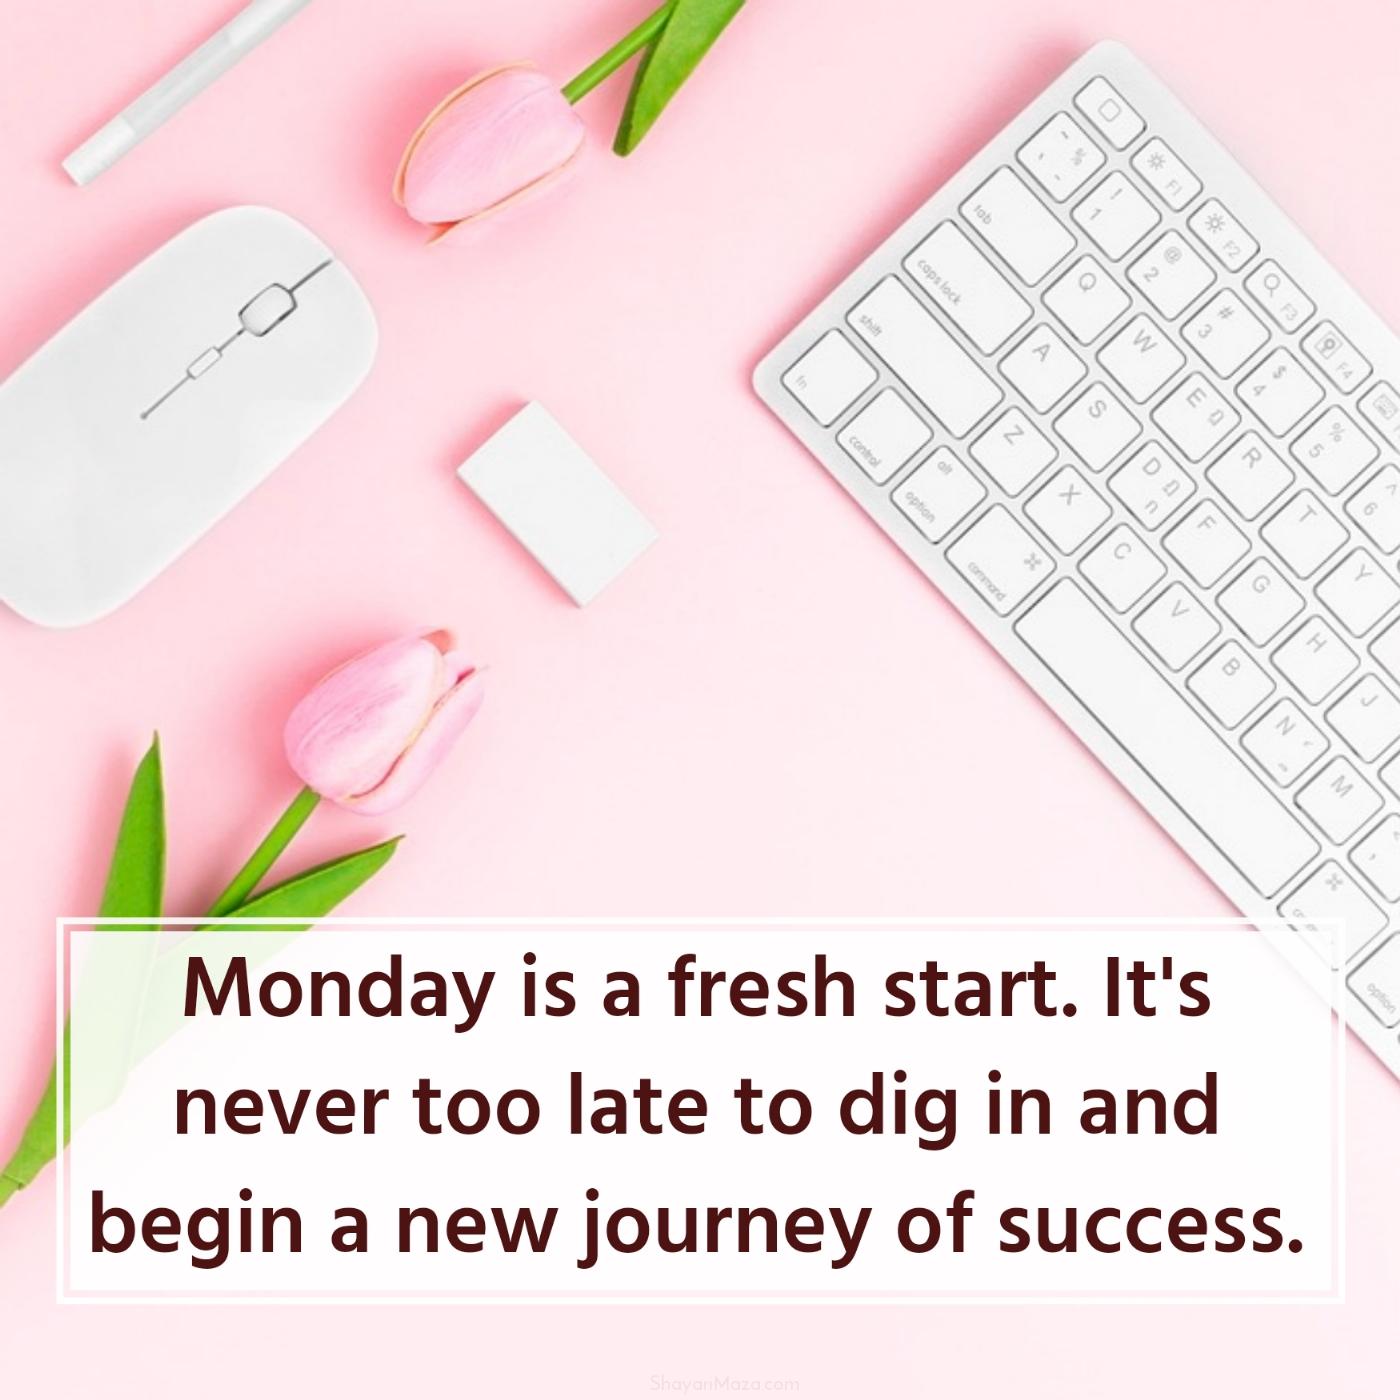 Monday is a fresh start It's never too late to dig in